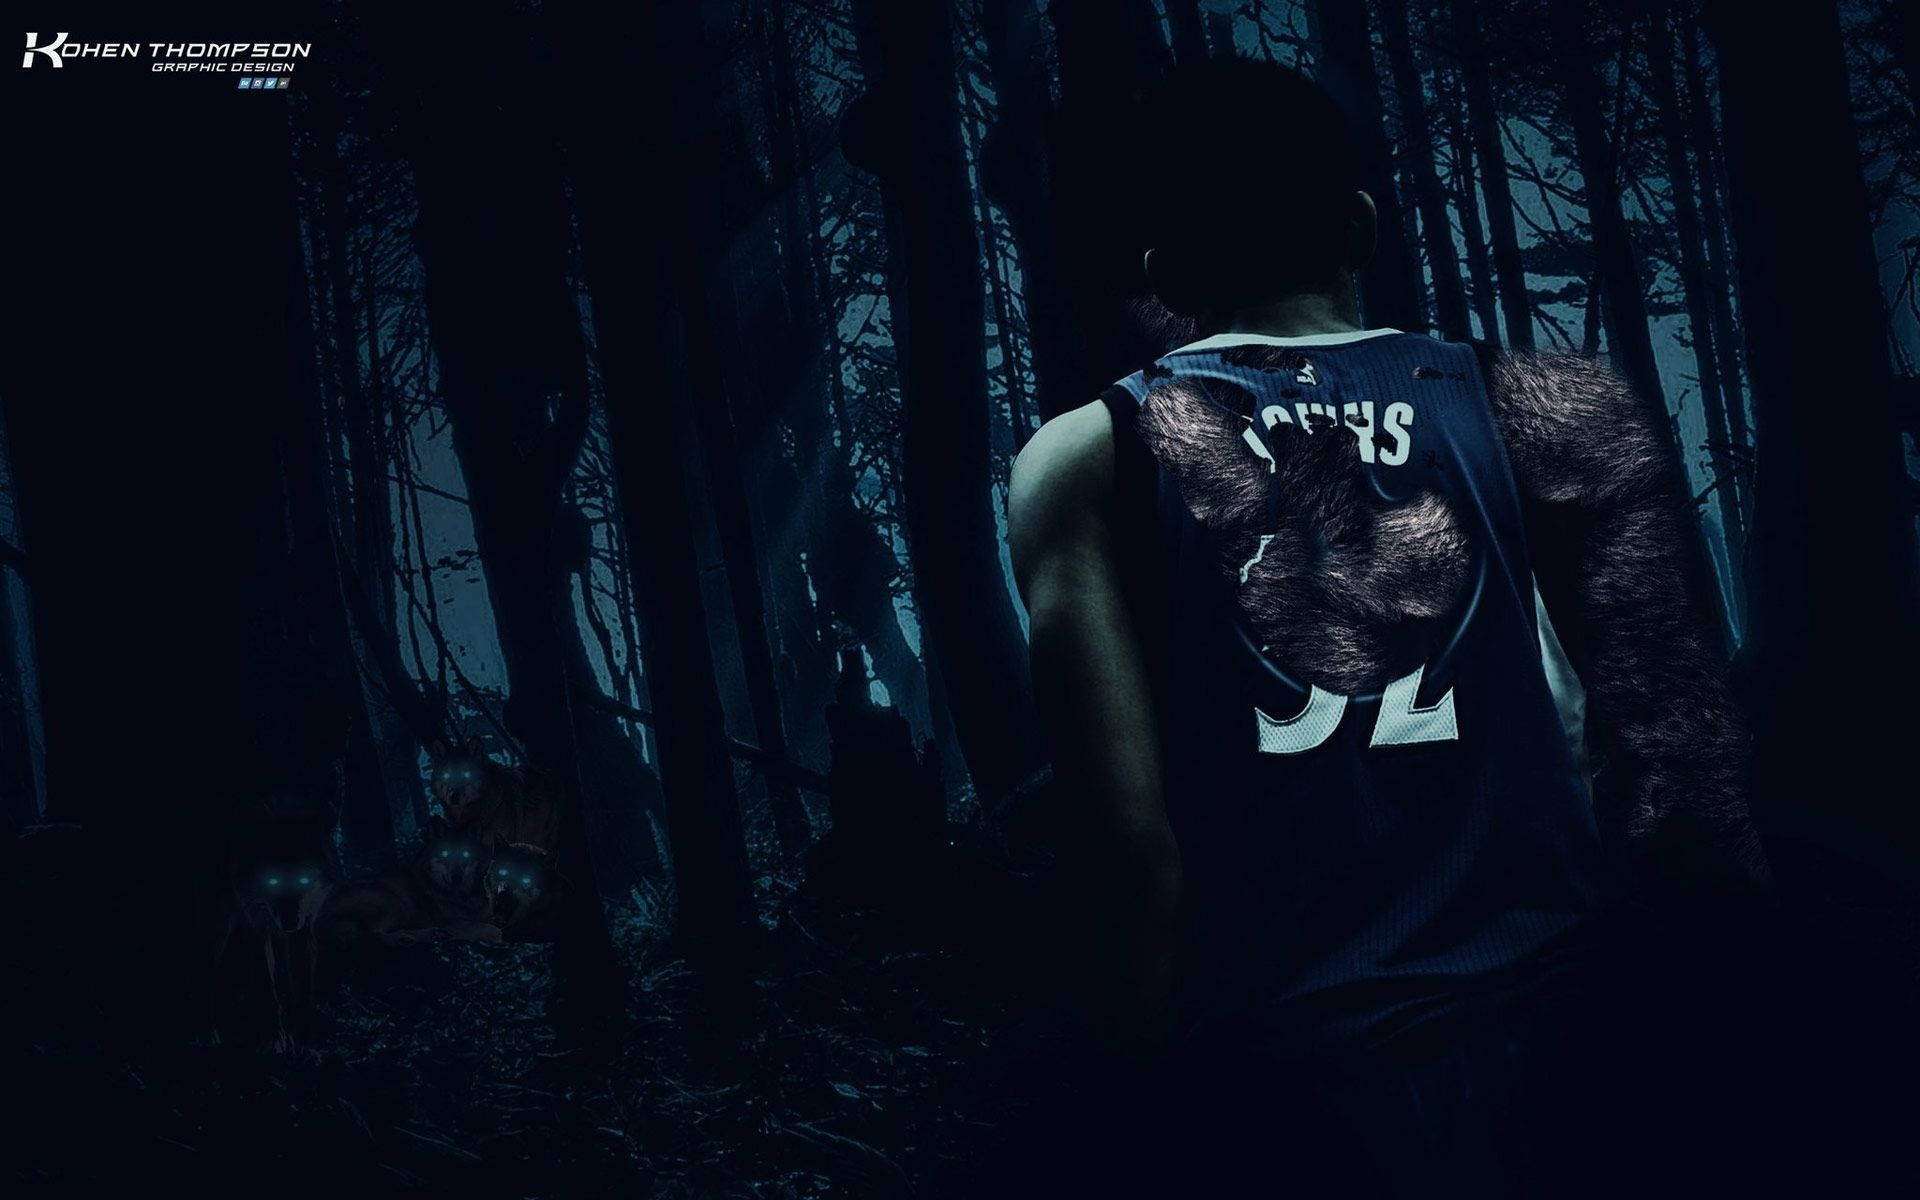 Karl-anthony Towns Ripped Wolves Jersey Wallpaper